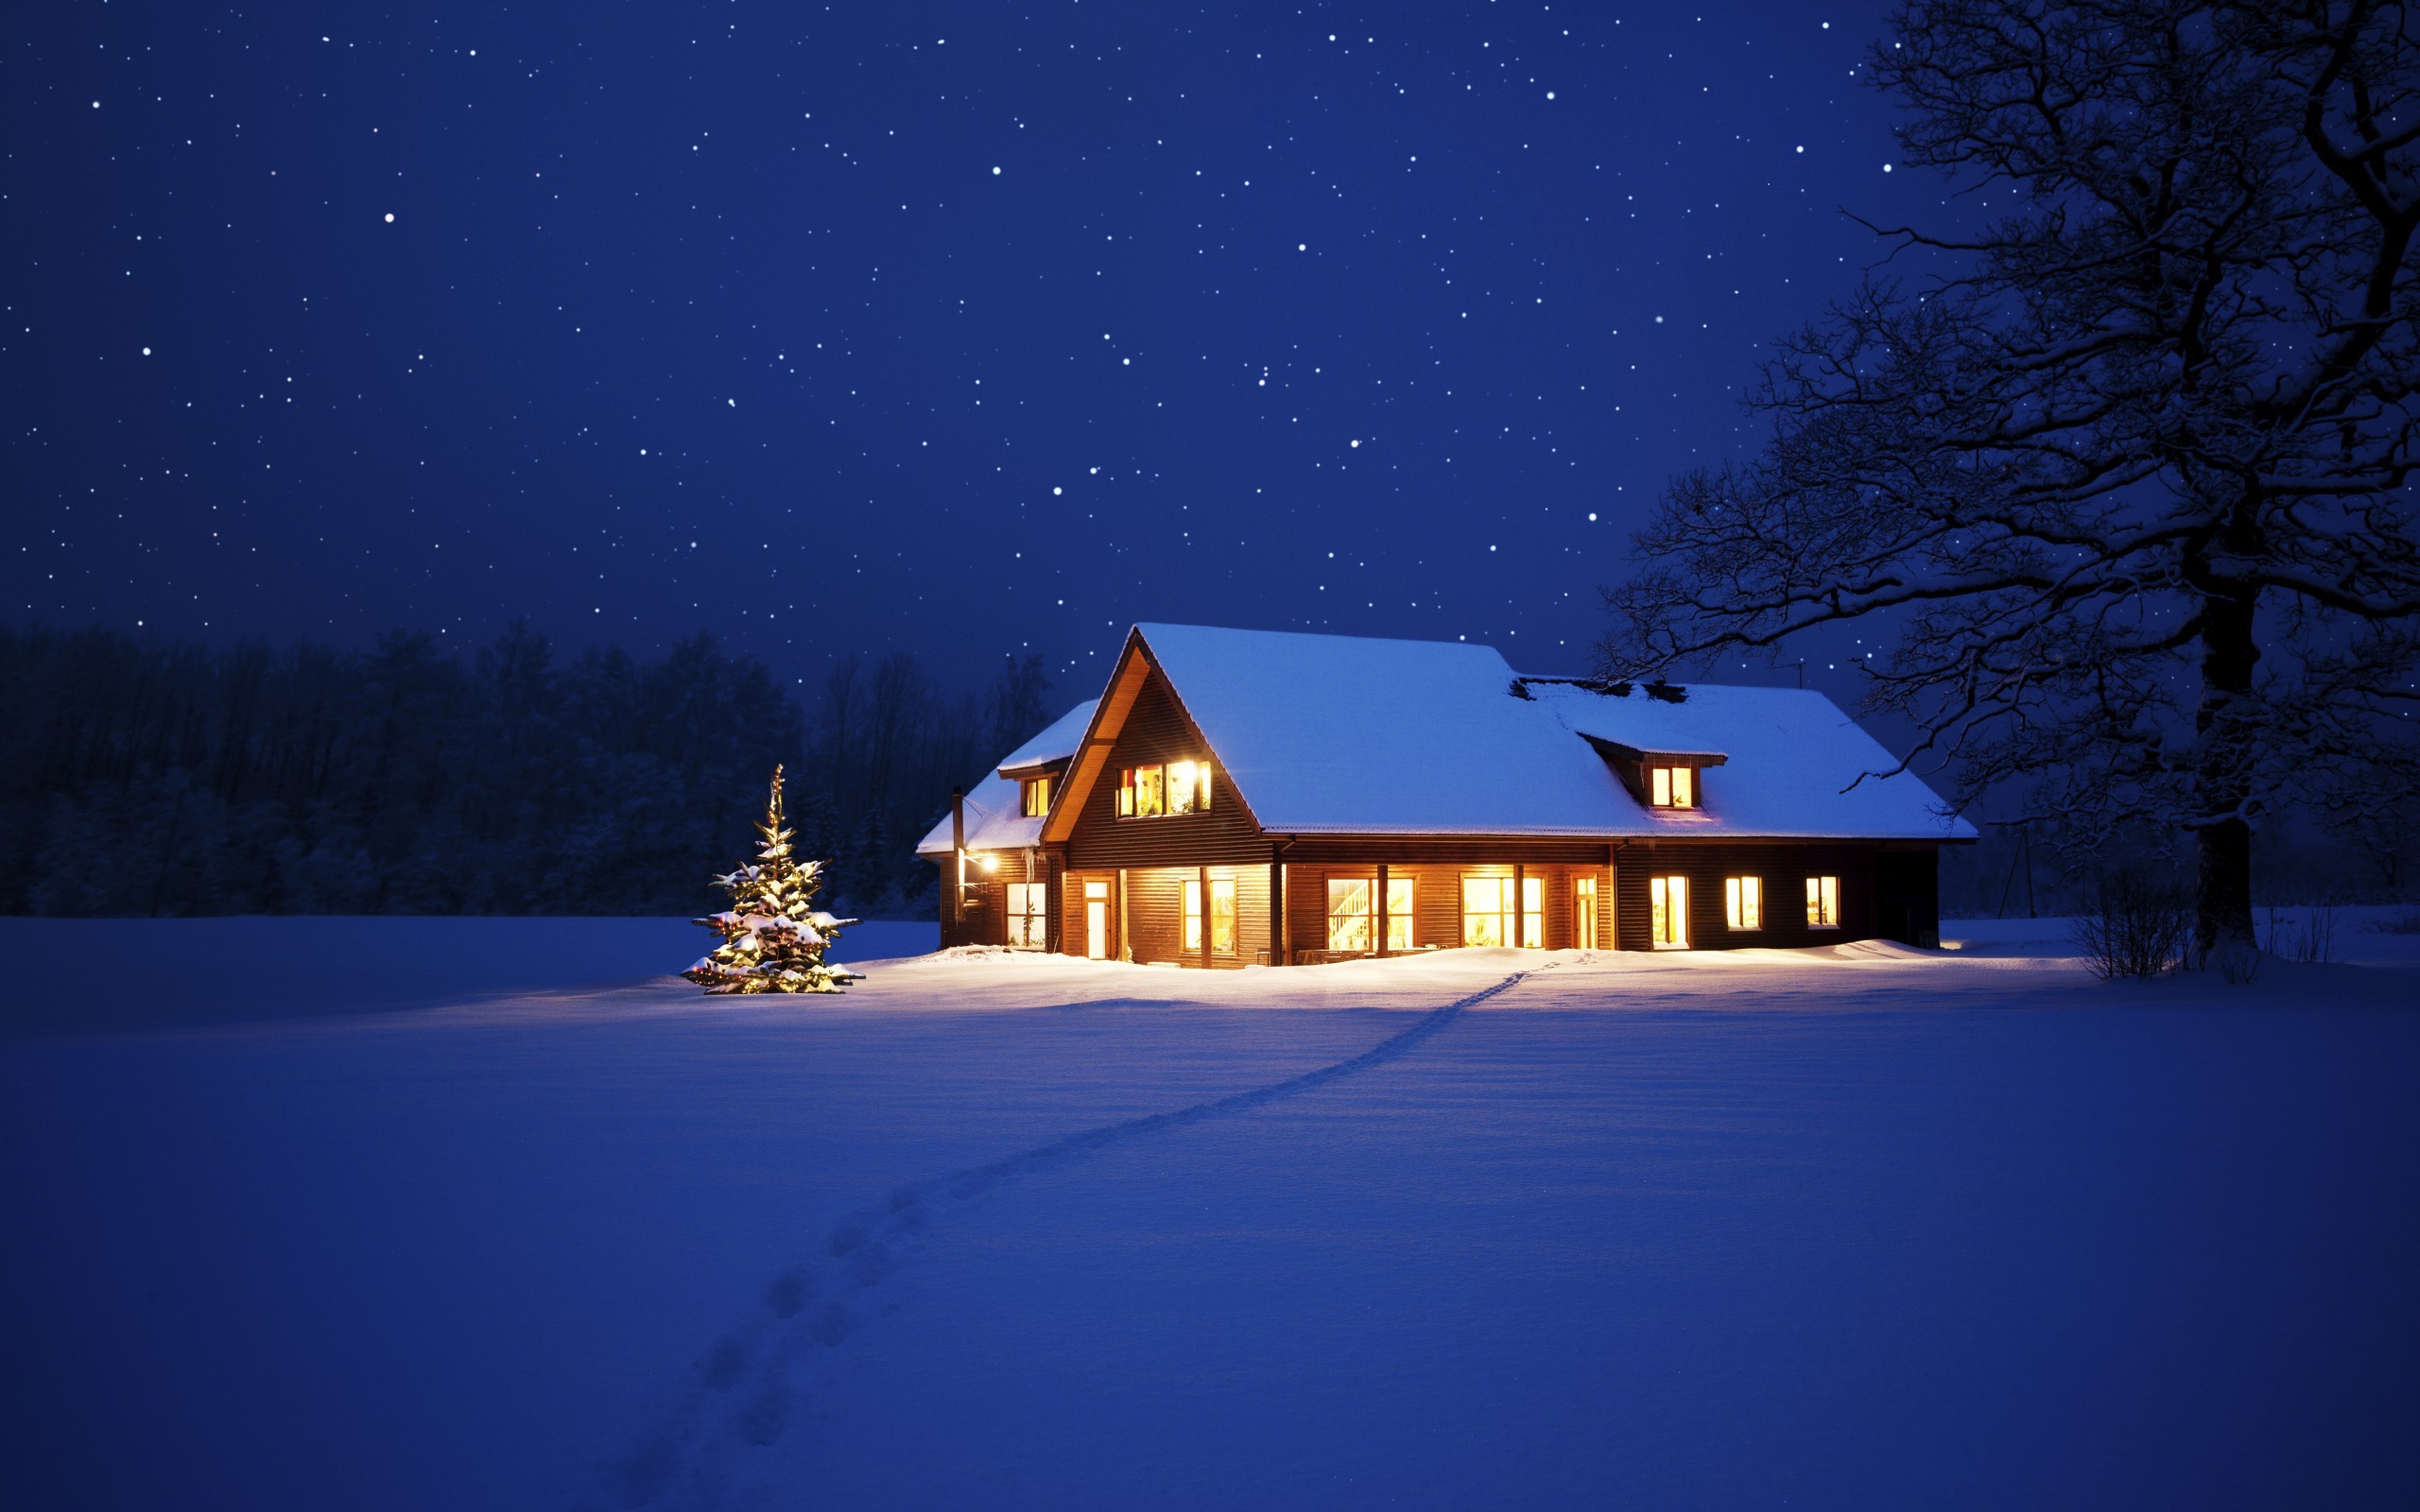 lonely house in the snow wallpapers and images   wallpapers 2560x1600